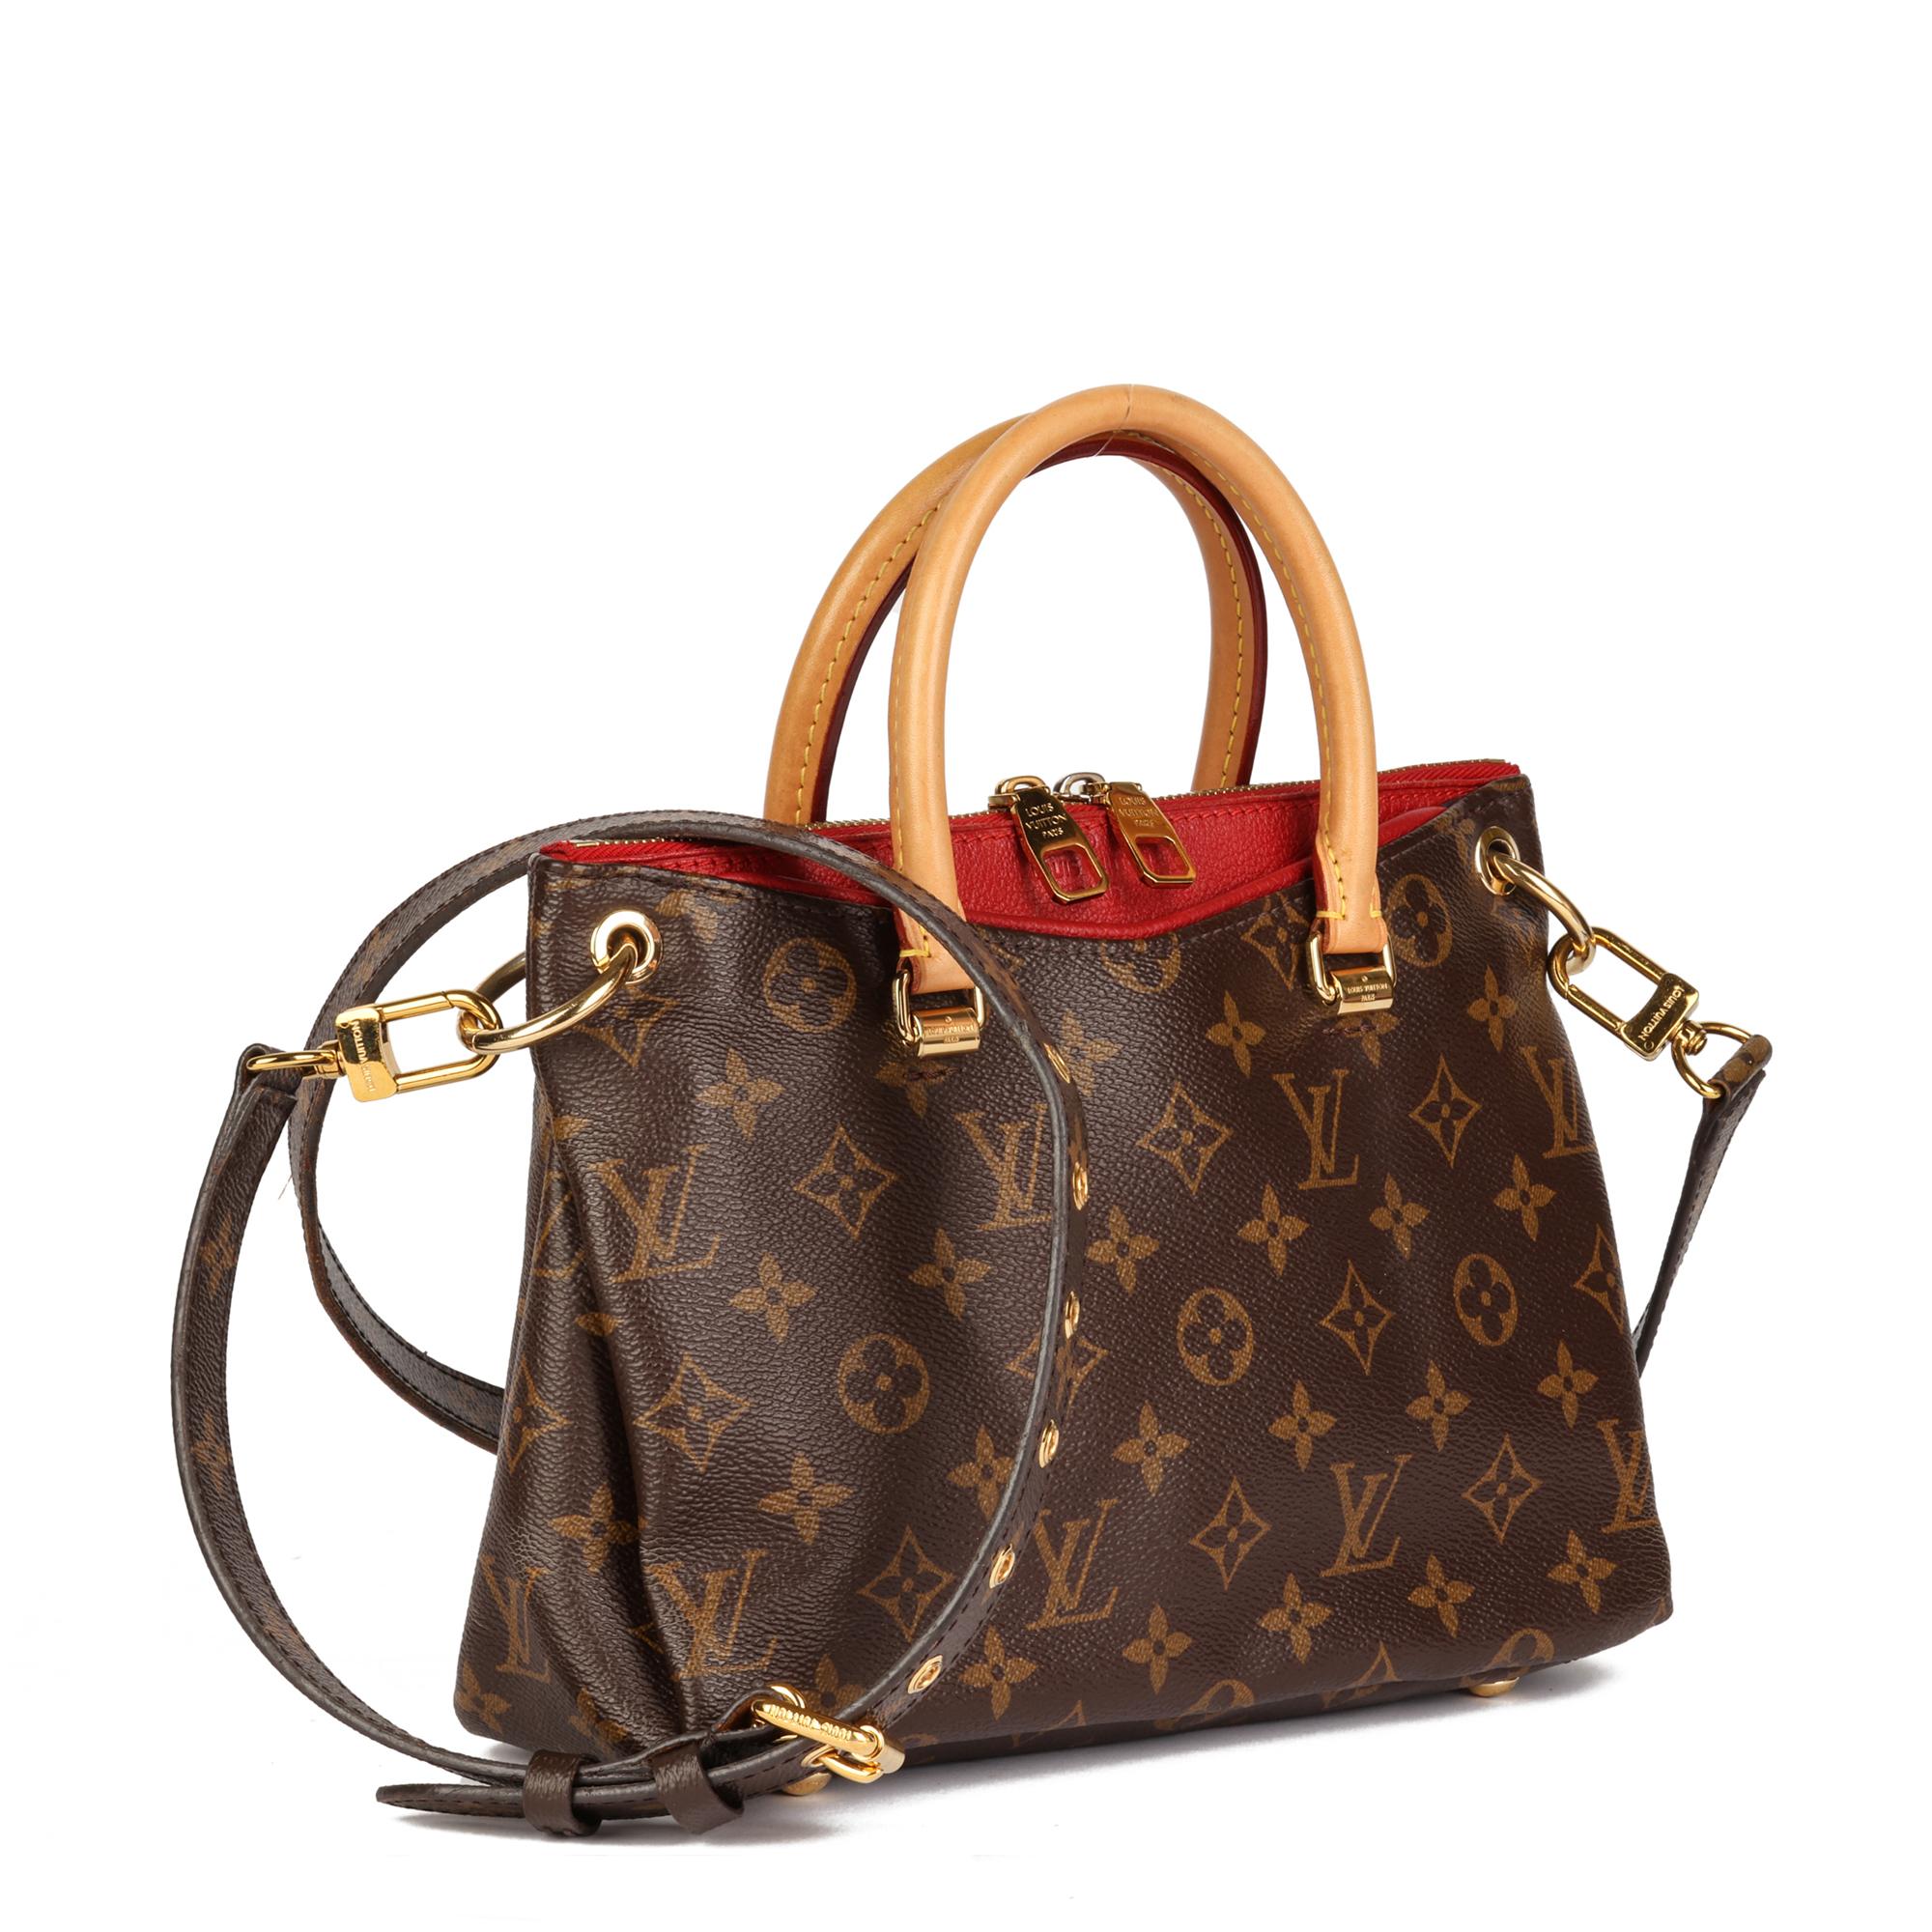 LOUIS VUITTON
Cherry Calfskin Leather, Brown Monogram Coated Canvas & Vachetta Leather Pallas MM

Serial Number: CA4166
Age (Circa): 2016
Accompanied By: Louis Vuitton Dust Bag
Authenticity Details: Date Stamp (Made in Spain)
Gender: Ladies
Type: